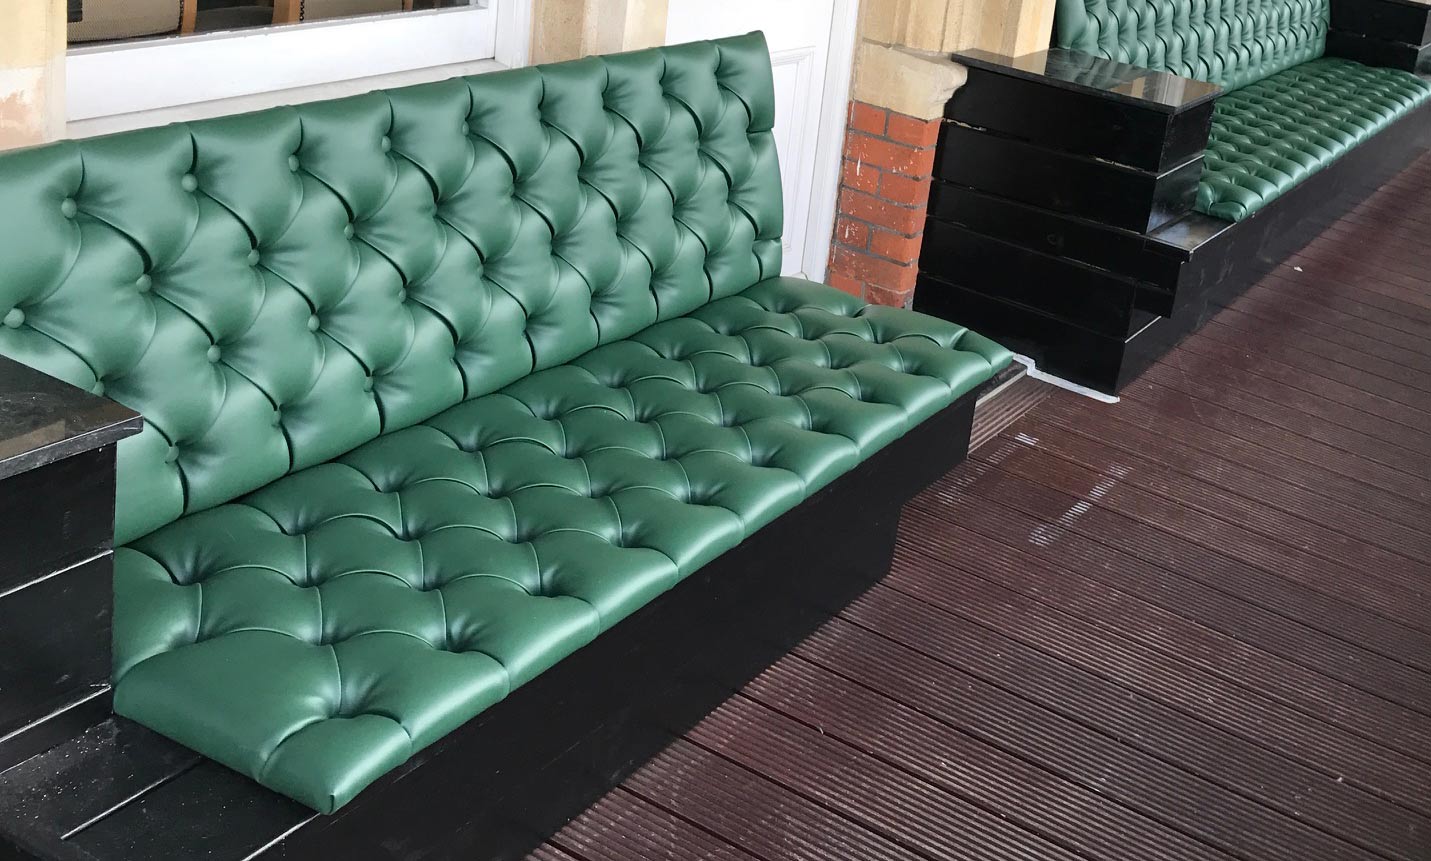 Pub seat upholstered with green leather